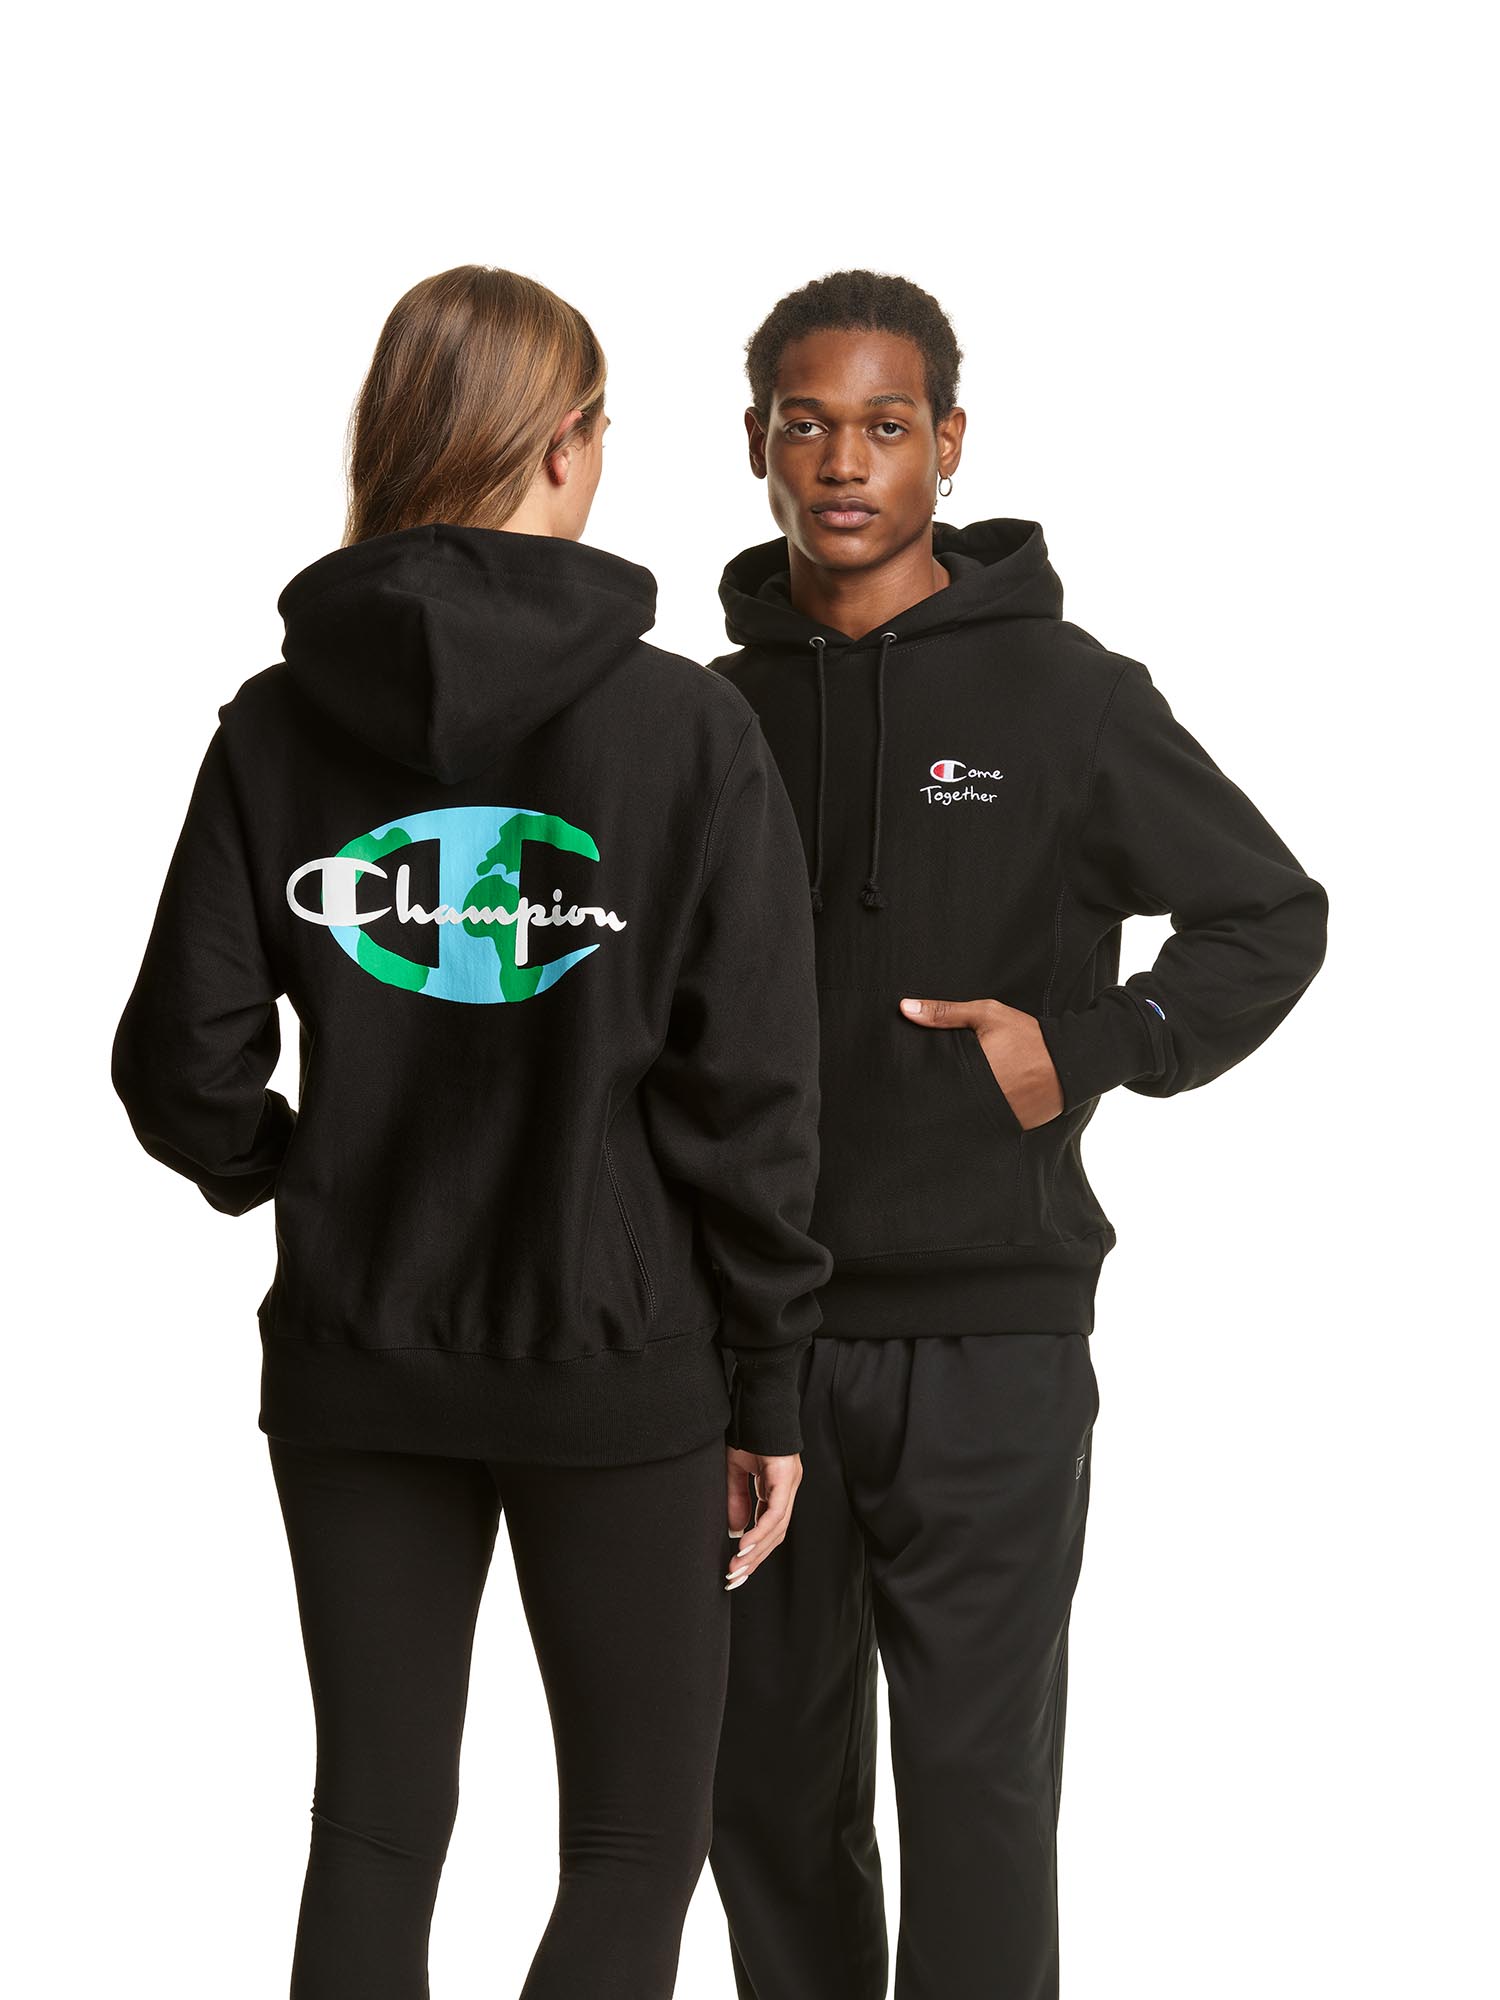 Champion Athleticwear Launches New CSR Intiative, Champion For All